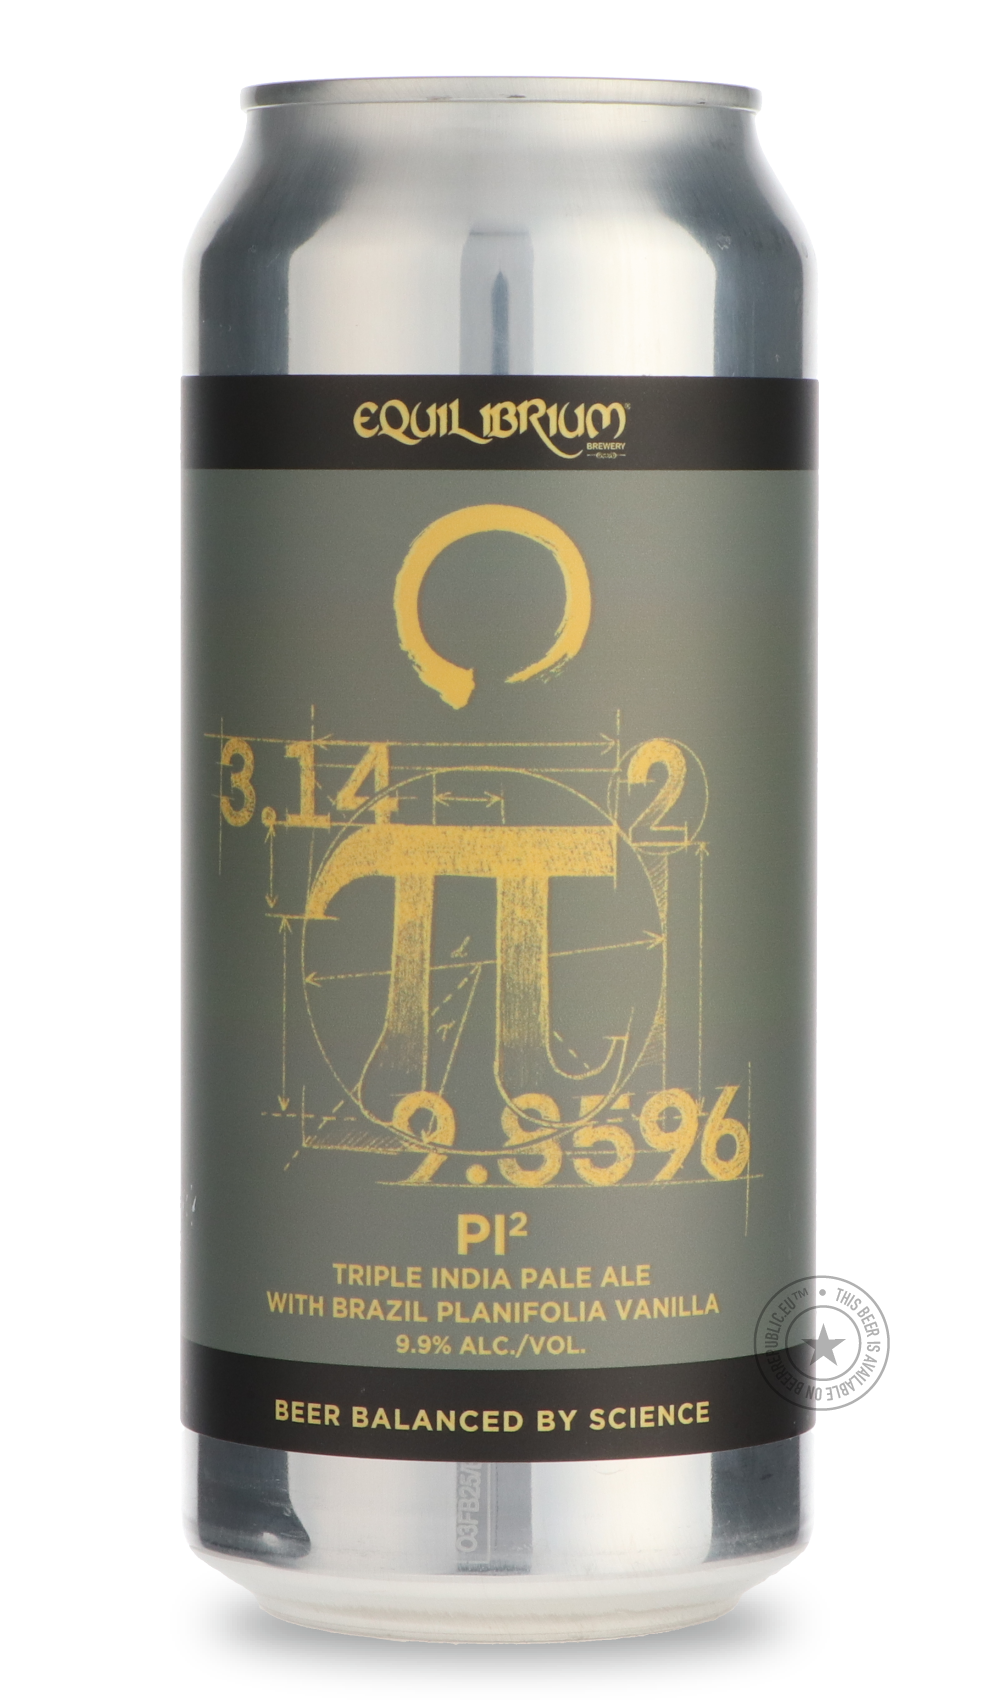 -Equilibrium- Pi²-IPA- Only @ Beer Republic - The best online beer store for American & Canadian craft beer - Buy beer online from the USA and Canada - Bier online kopen - Amerikaans bier kopen - Craft beer store - Craft beer kopen - Amerikanisch bier kaufen - Bier online kaufen - Acheter biere online - IPA - Stout - Porter - New England IPA - Hazy IPA - Imperial Stout - Barrel Aged - Barrel Aged Imperial Stout - Brown - Dark beer - Blond - Blonde - Pilsner - Lager - Wheat - Weizen - Amber - Barley Wine - Q